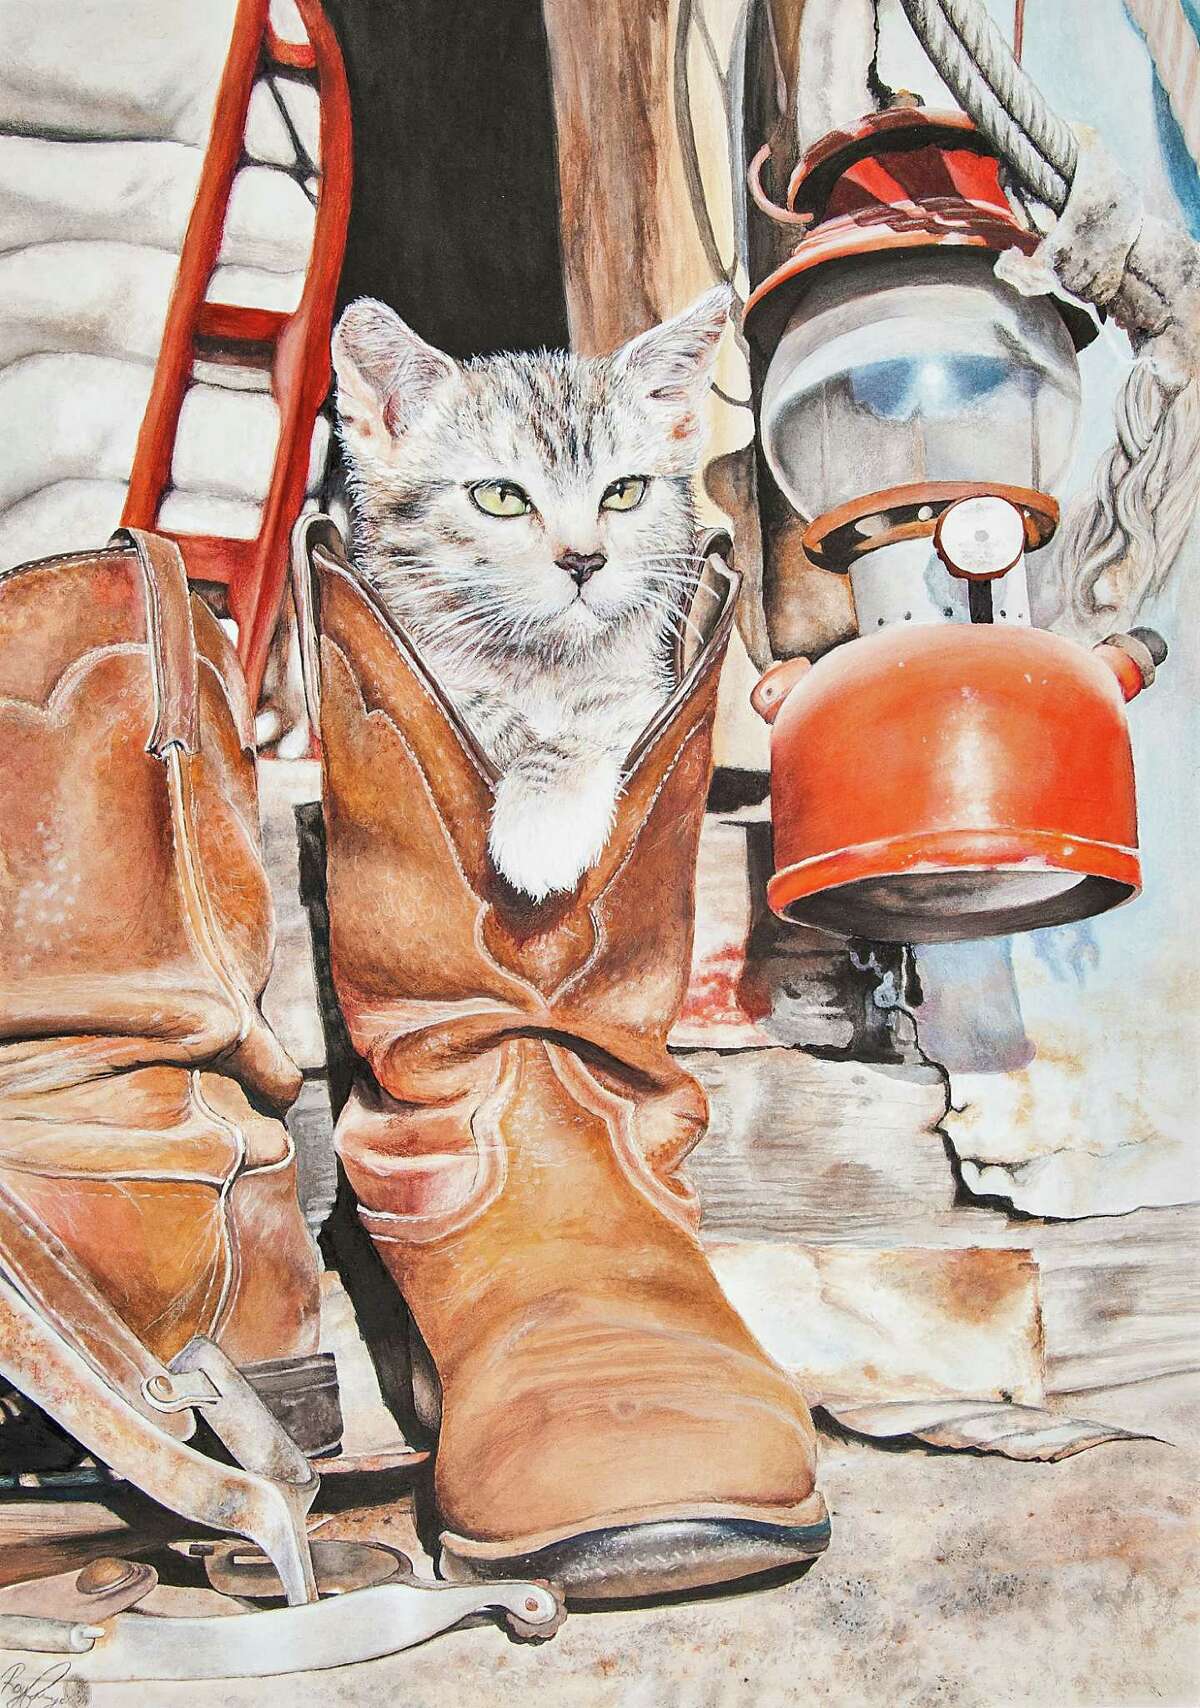 The Reserve Champion Best of Show award went to "Peek-a-Boot," created by high school senior Rachel Faye Becker from Lamar CISD. Becker's piece displayed her love for cats by picturing a kitten peeking out the top of a cowboy boot.